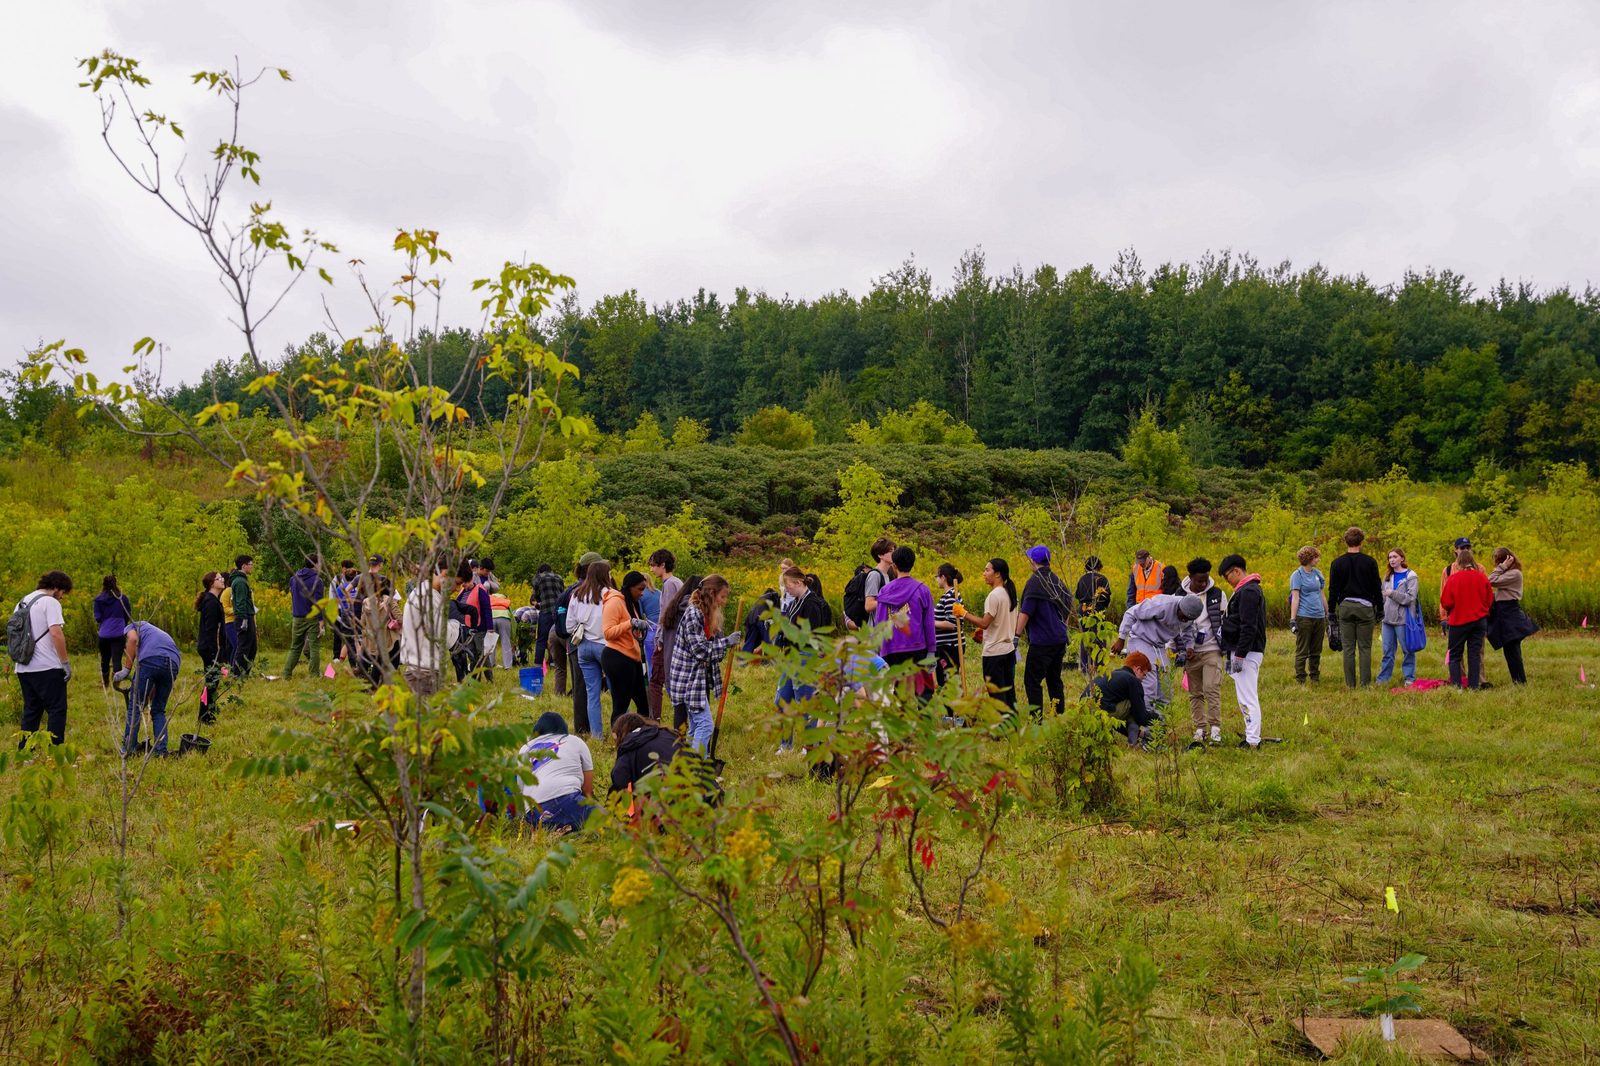 Students plant trees on empty fields. In the background, there is prairie land and trees.